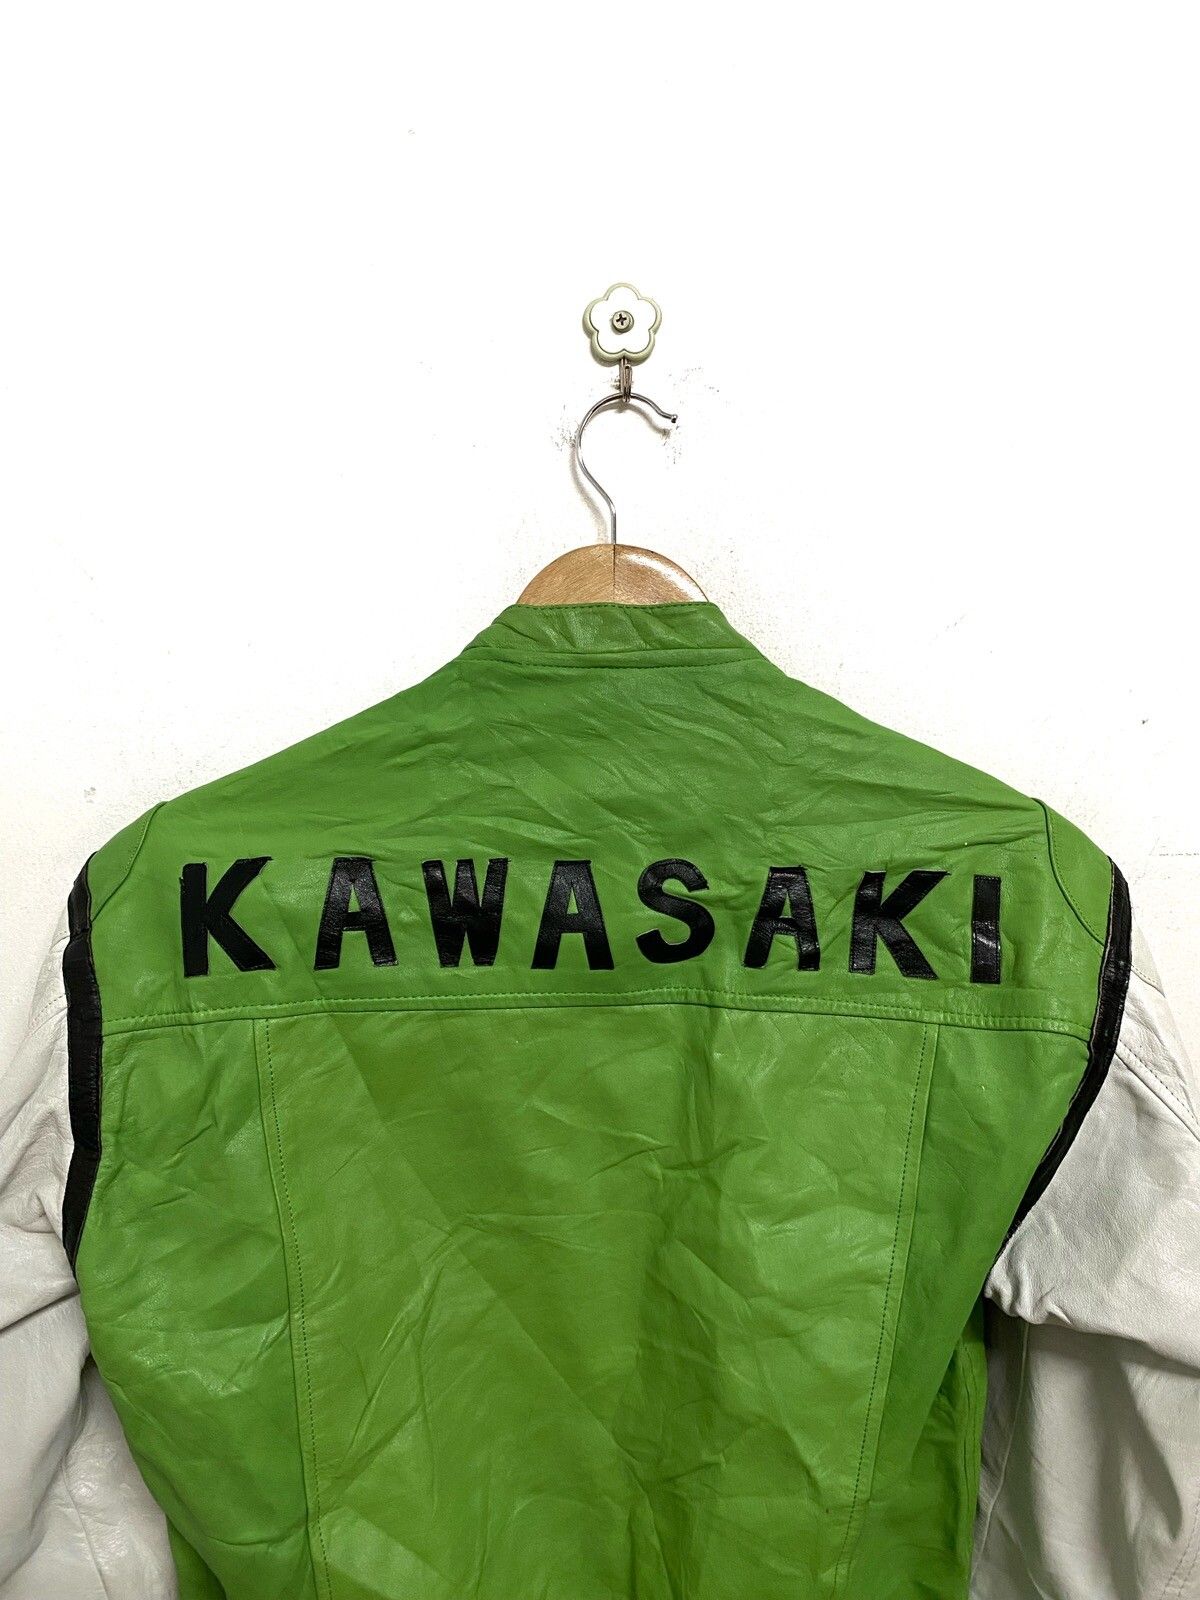 Sports Specialties - KAWASAKI Leather Racing Suit Overall - 10